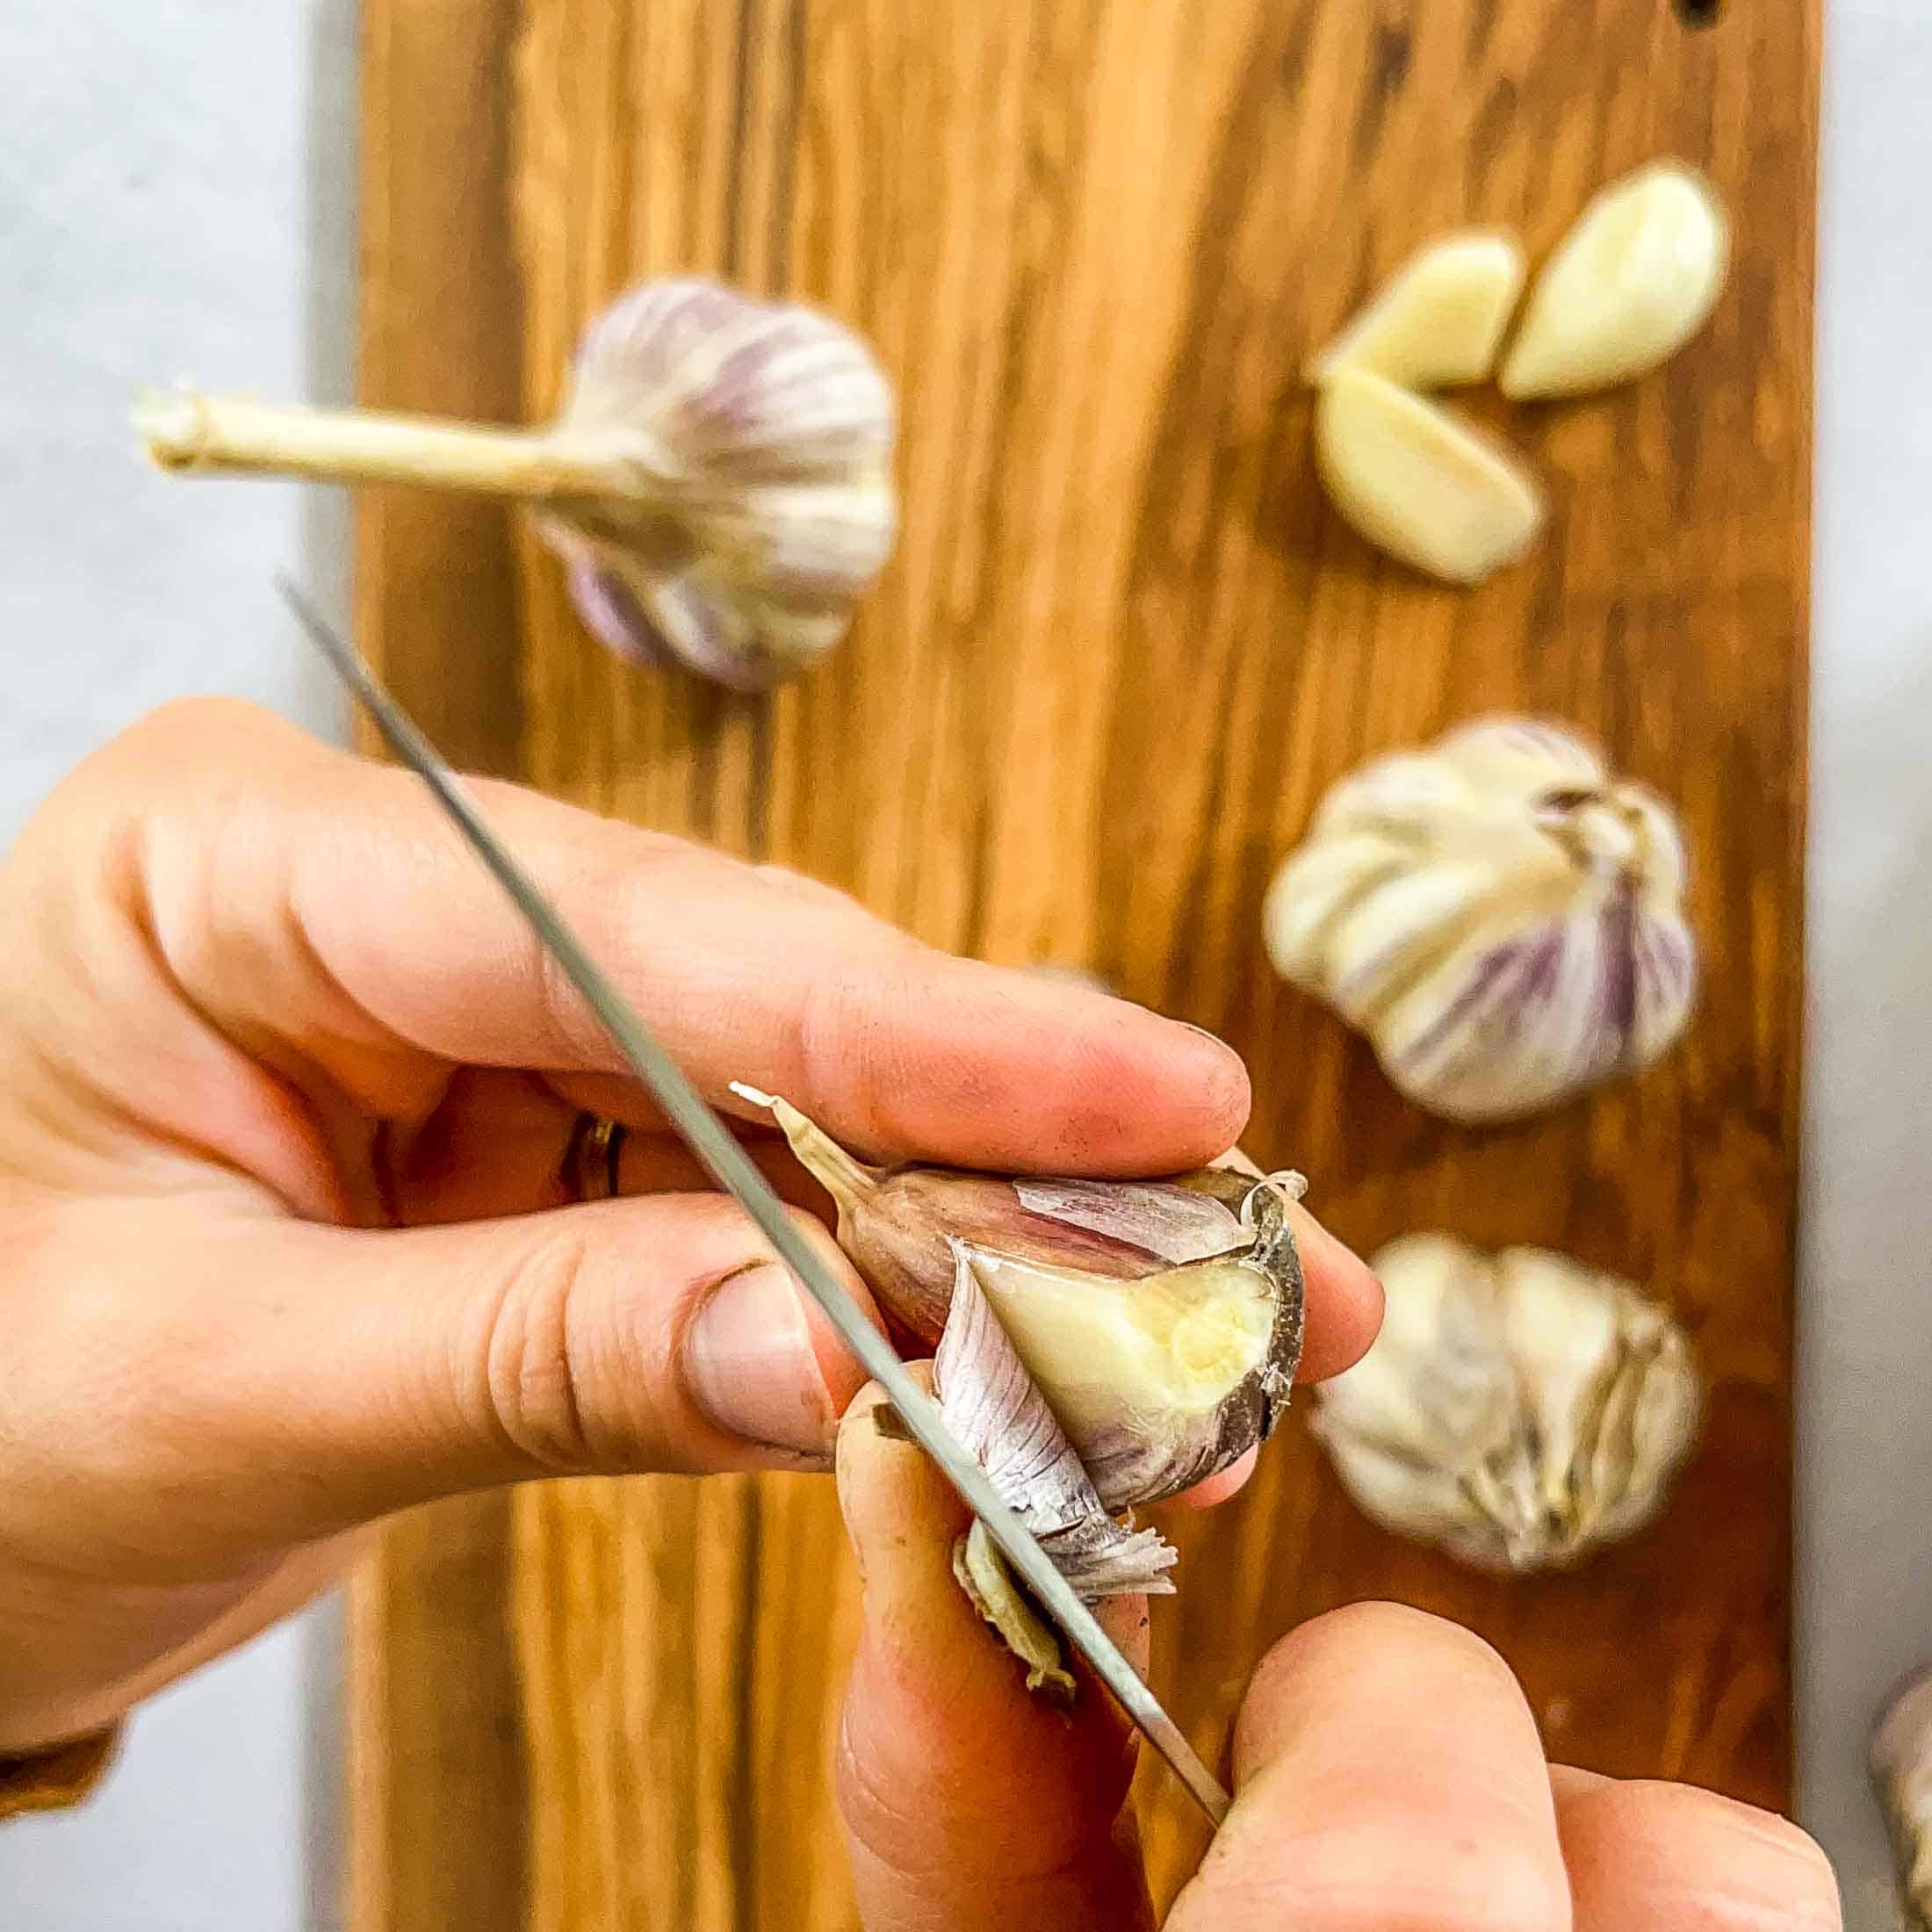 Peeling the outer peel off of a clove of garlic with a knife.